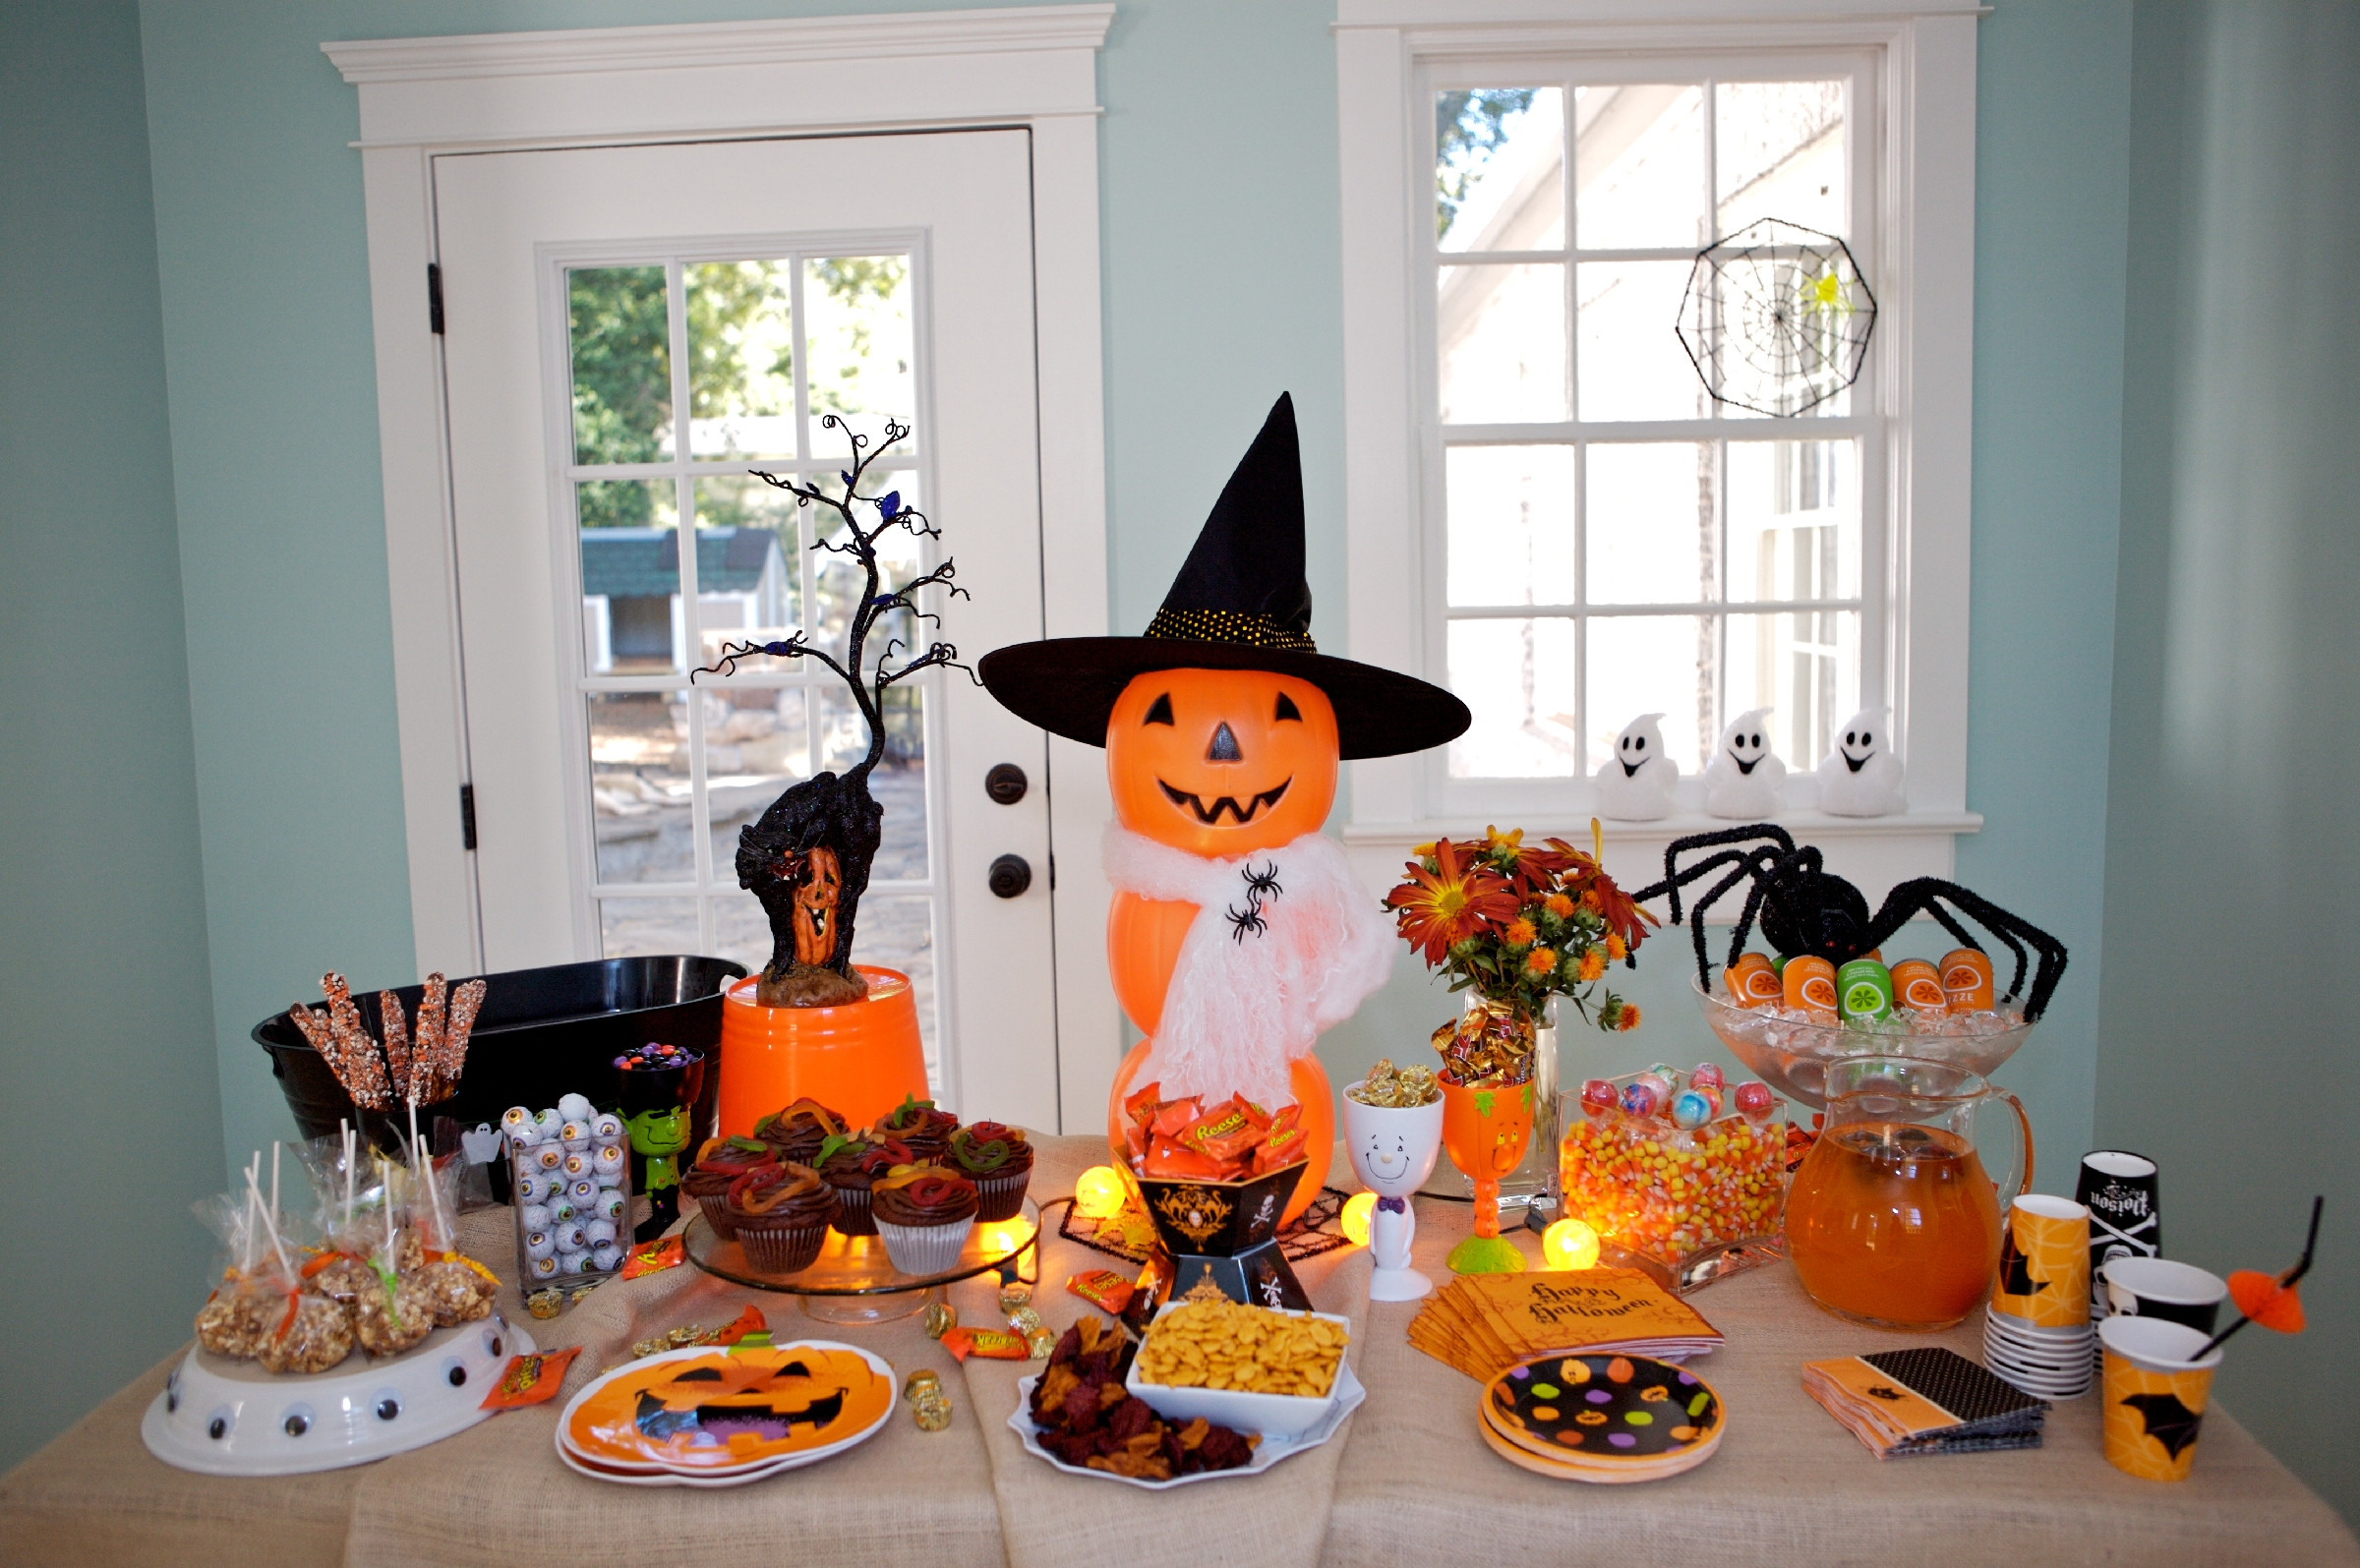 Kids Party Ideas For Halloween
 Martie Knows Parties BLOG Martie s Halloween Party